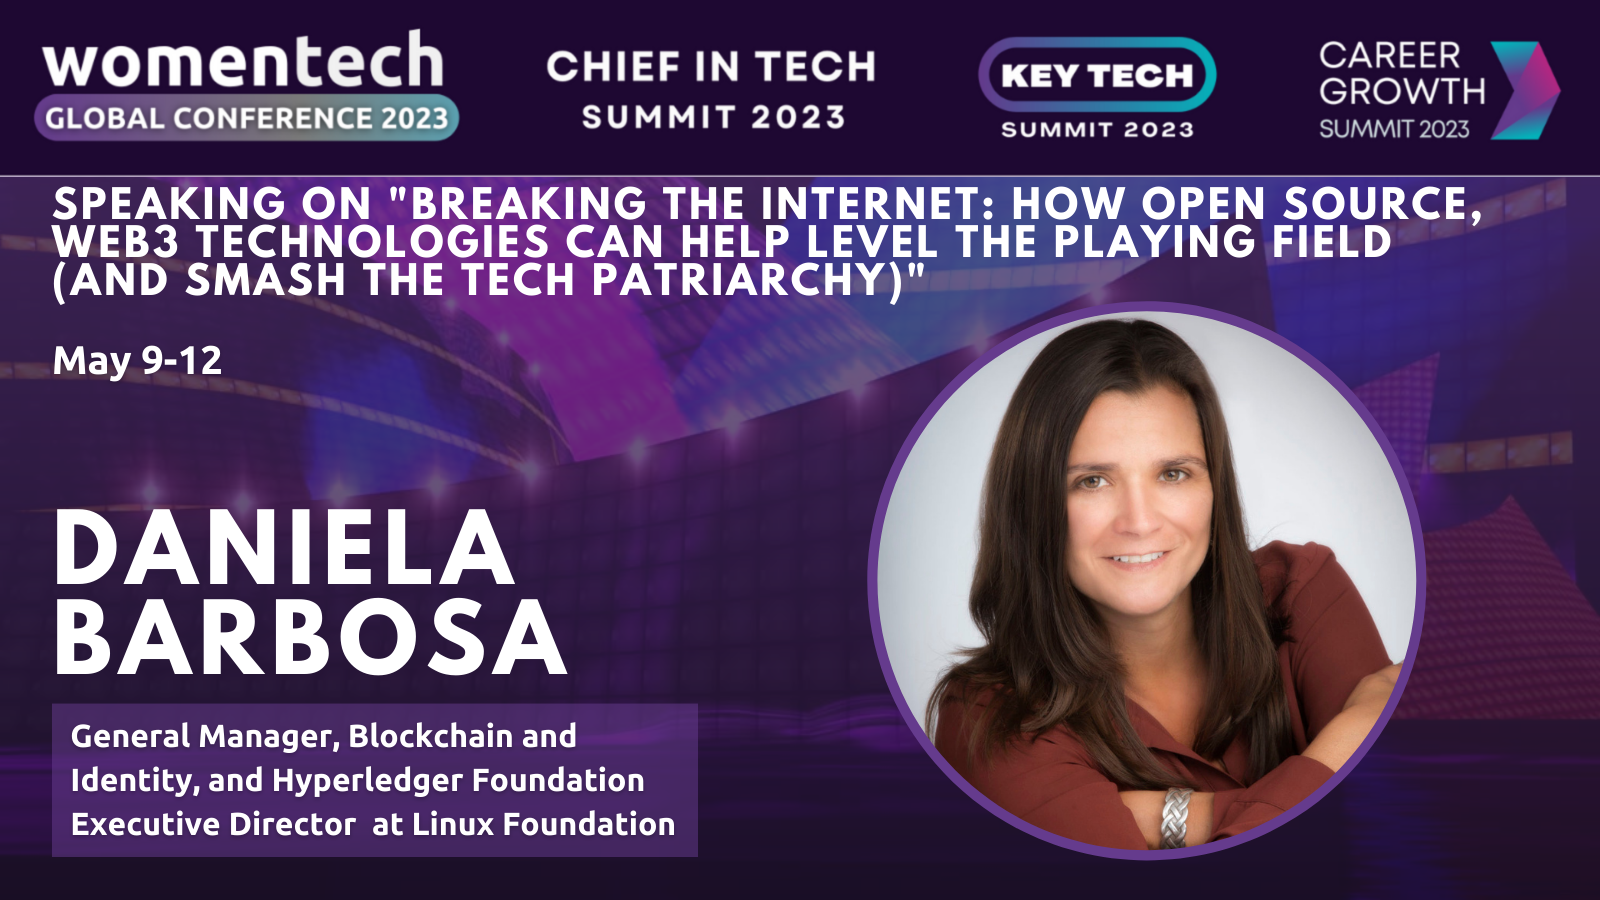 Womentech Global Conference 2023